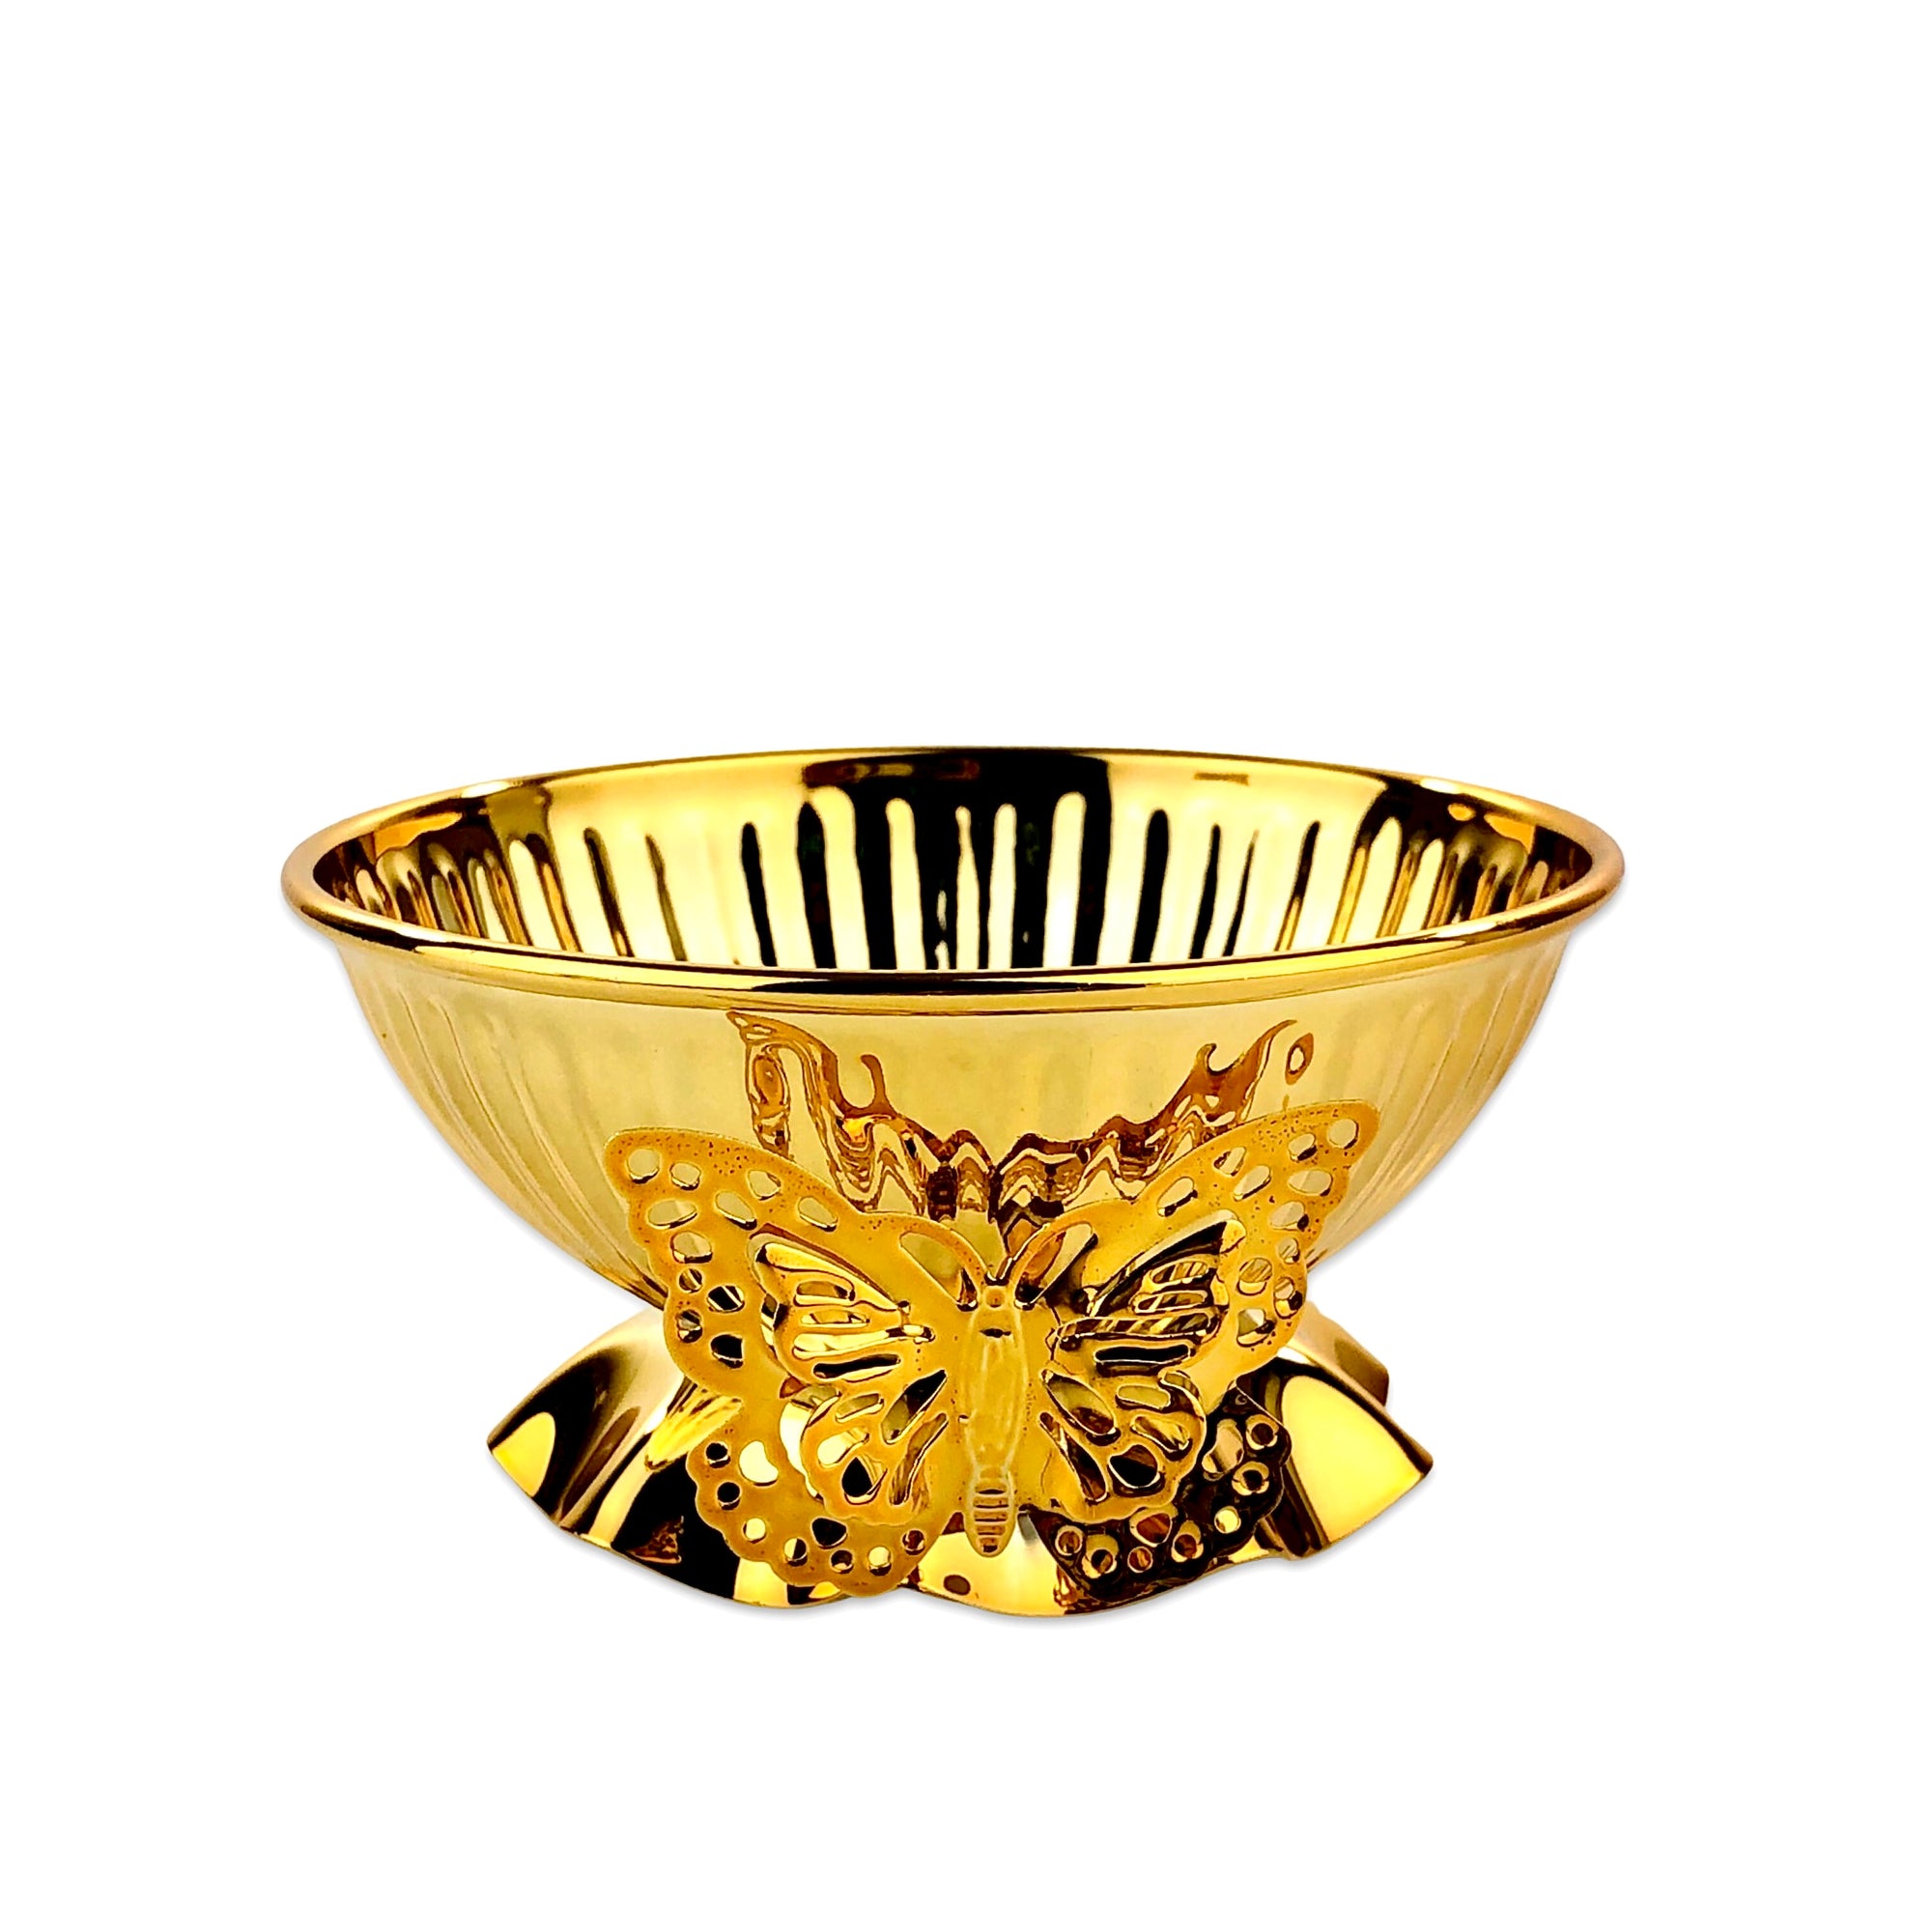 Butterfly Golden Small Bowl